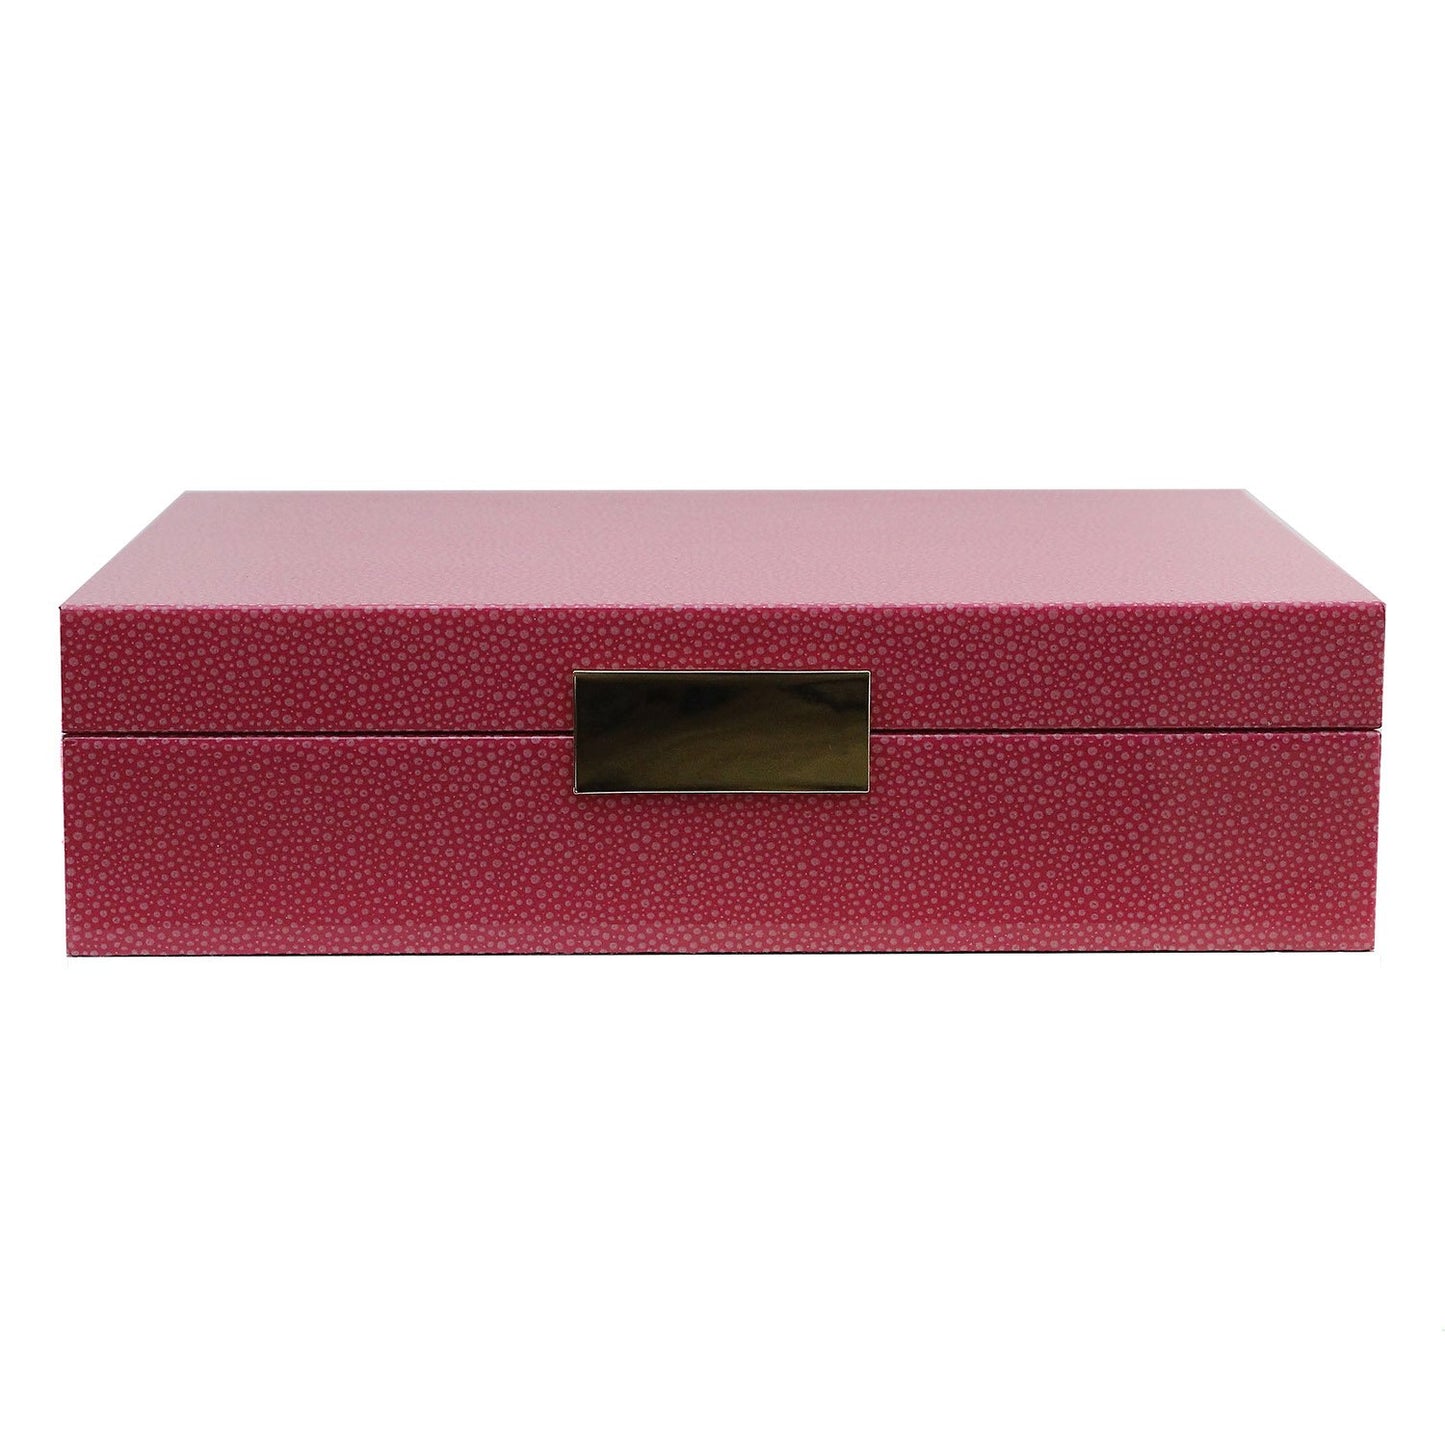 Large pink jewelry box with gold plated clasp